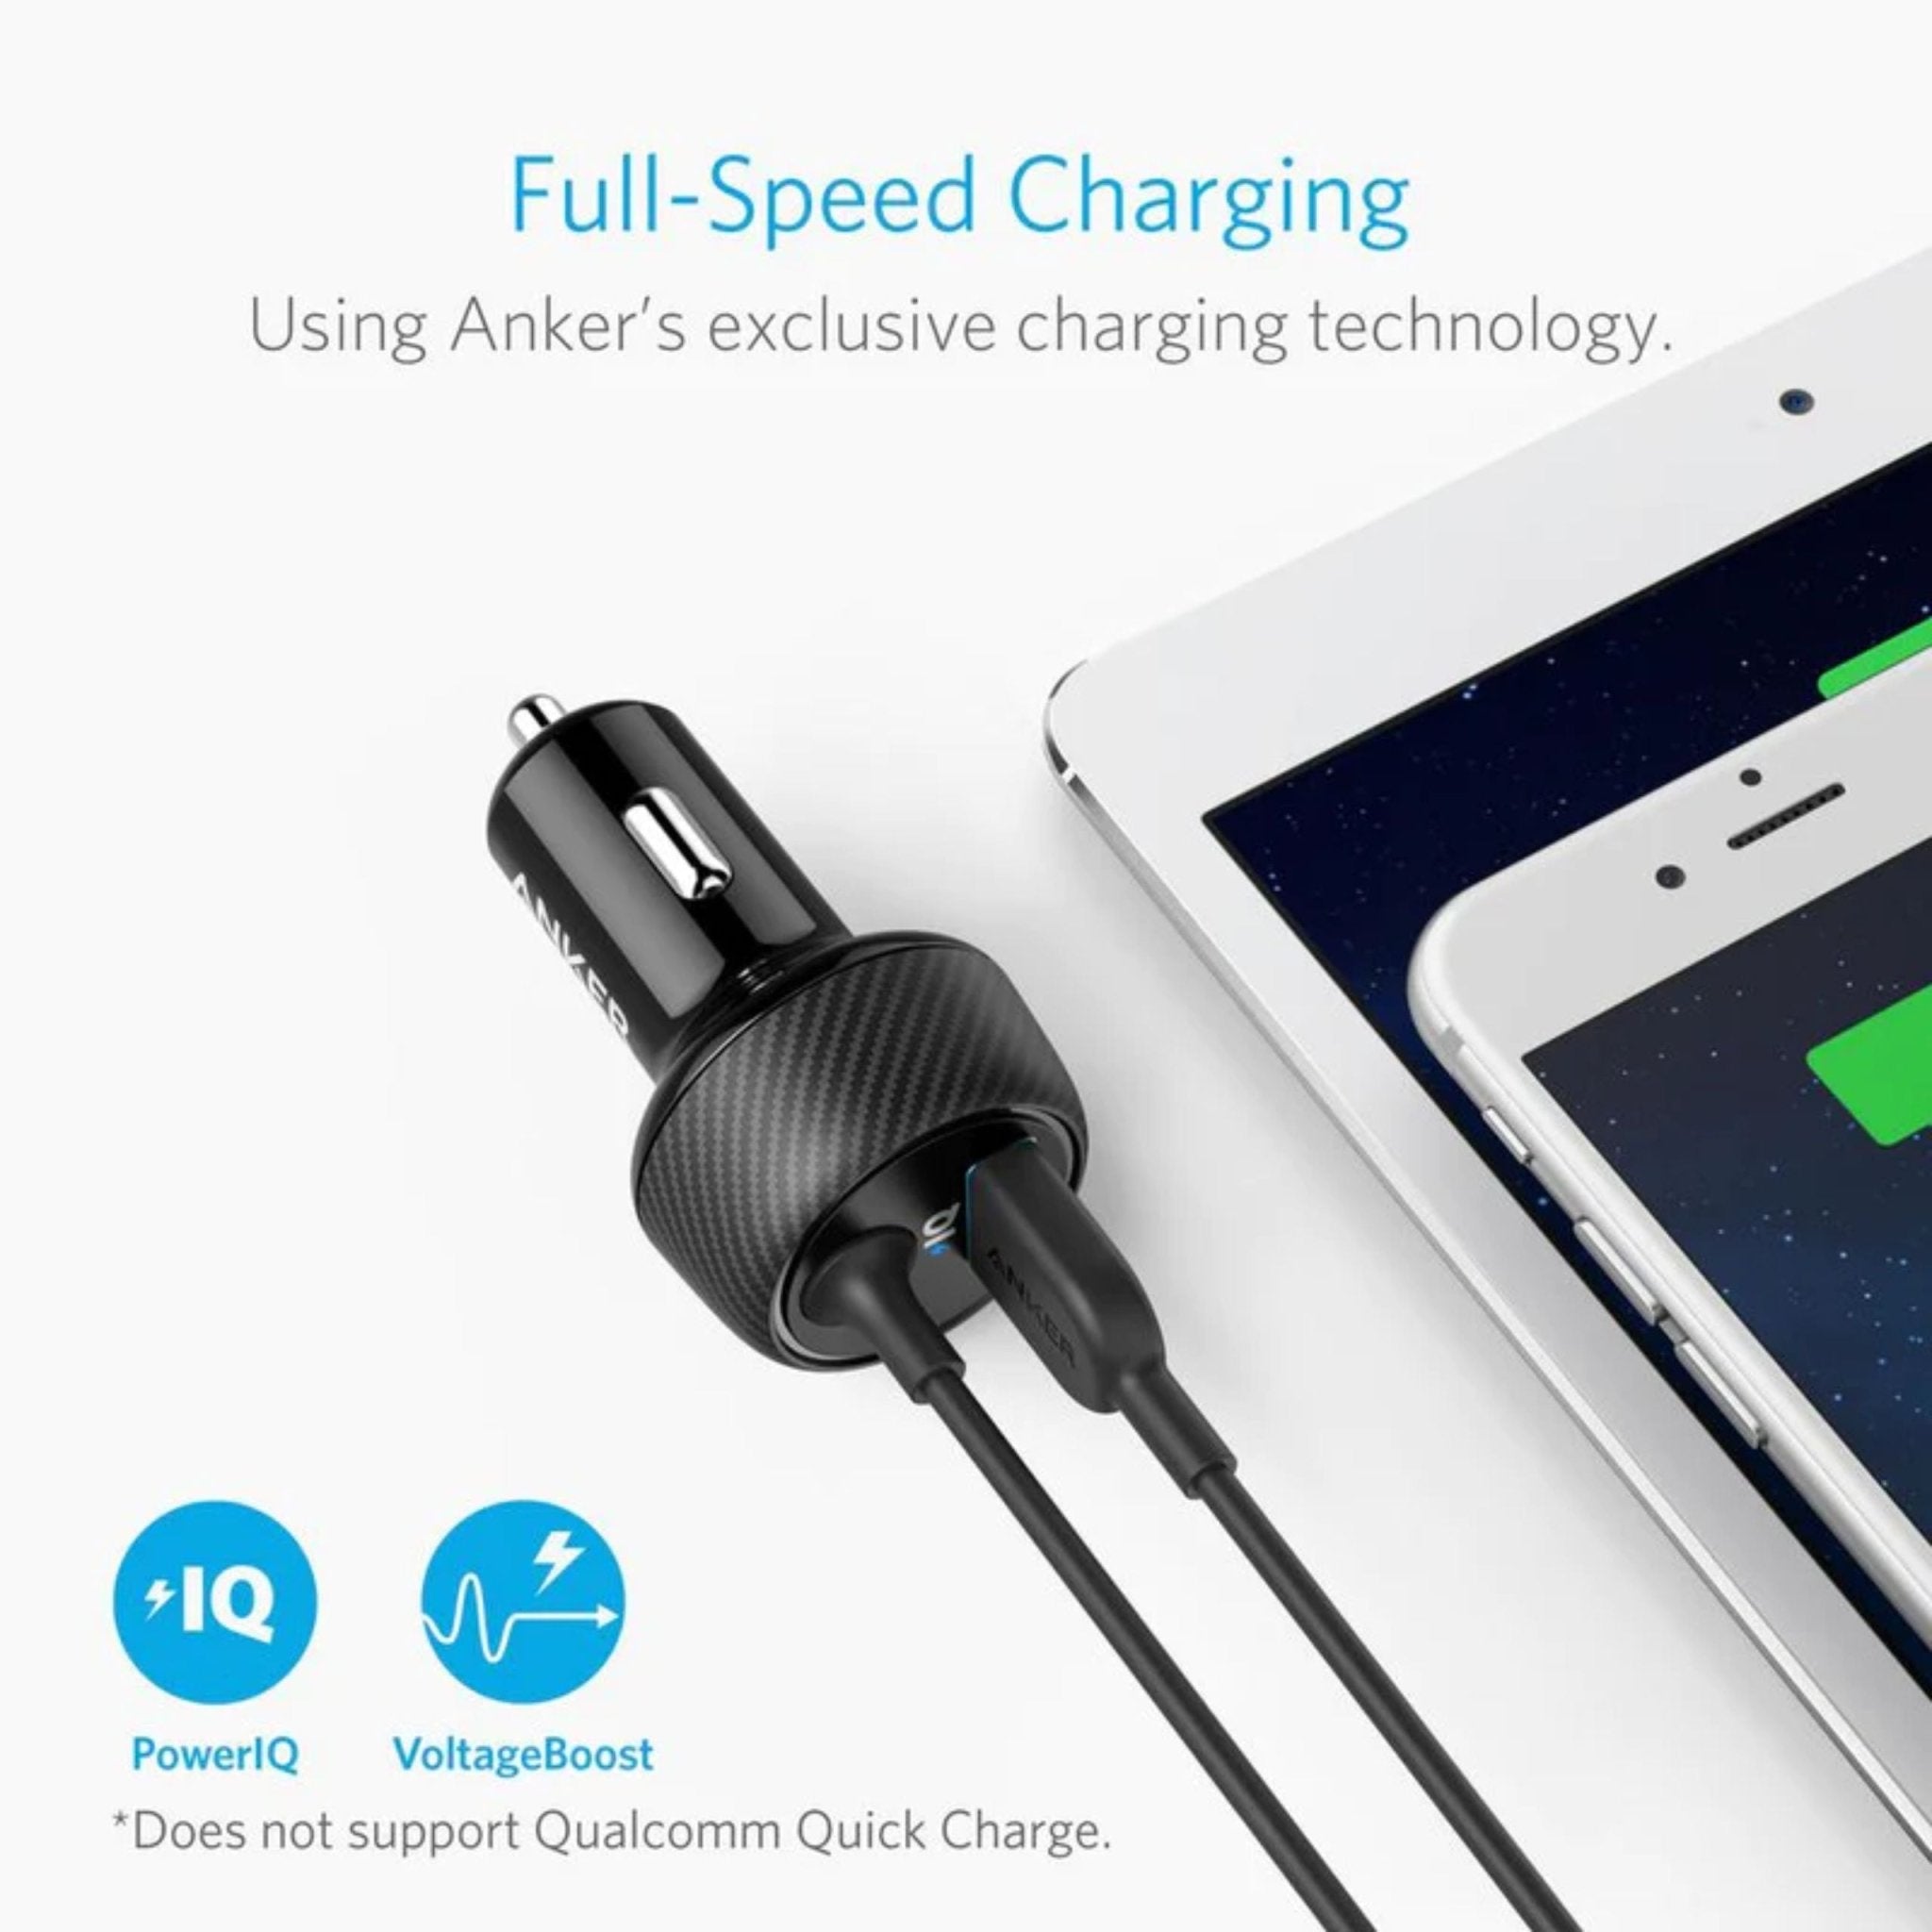 Anker Powerdrive Elite 2 Ports with Lightning Connector